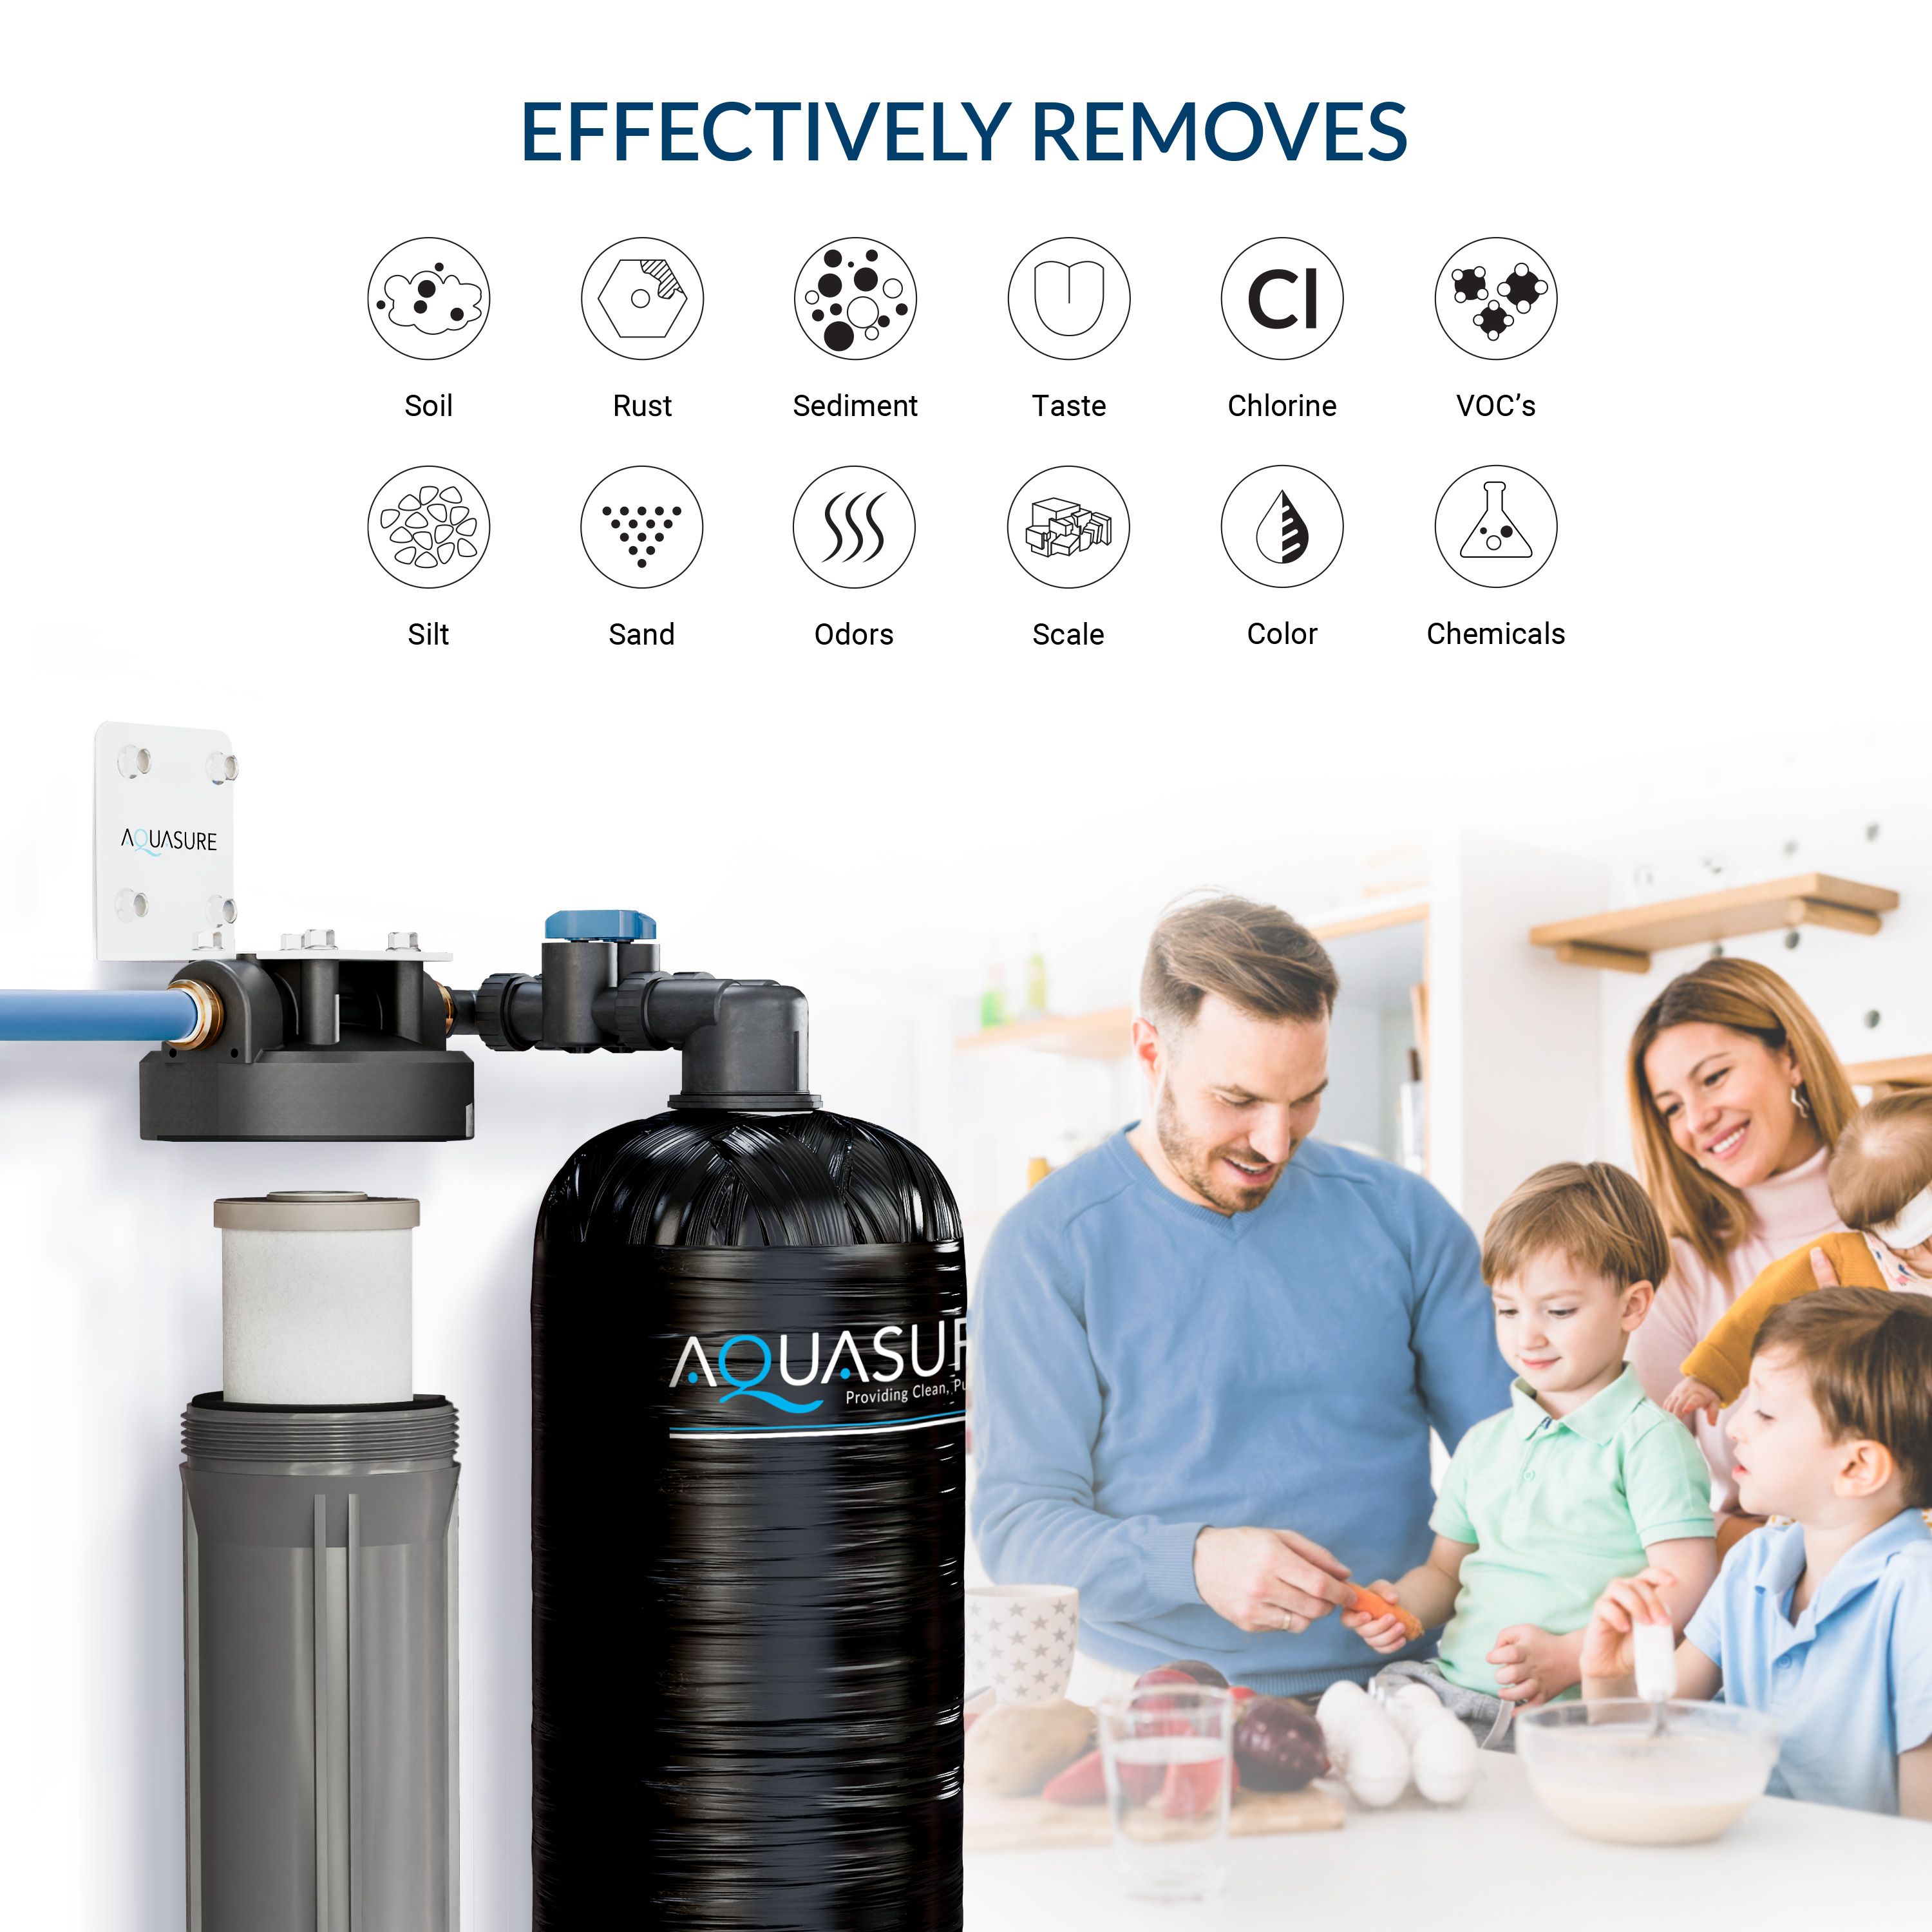 Aquasure Serene Series 10 GPM Whole House Salt-Free Water Conditioning/Softening System with Triple Purpose Pre-Filter